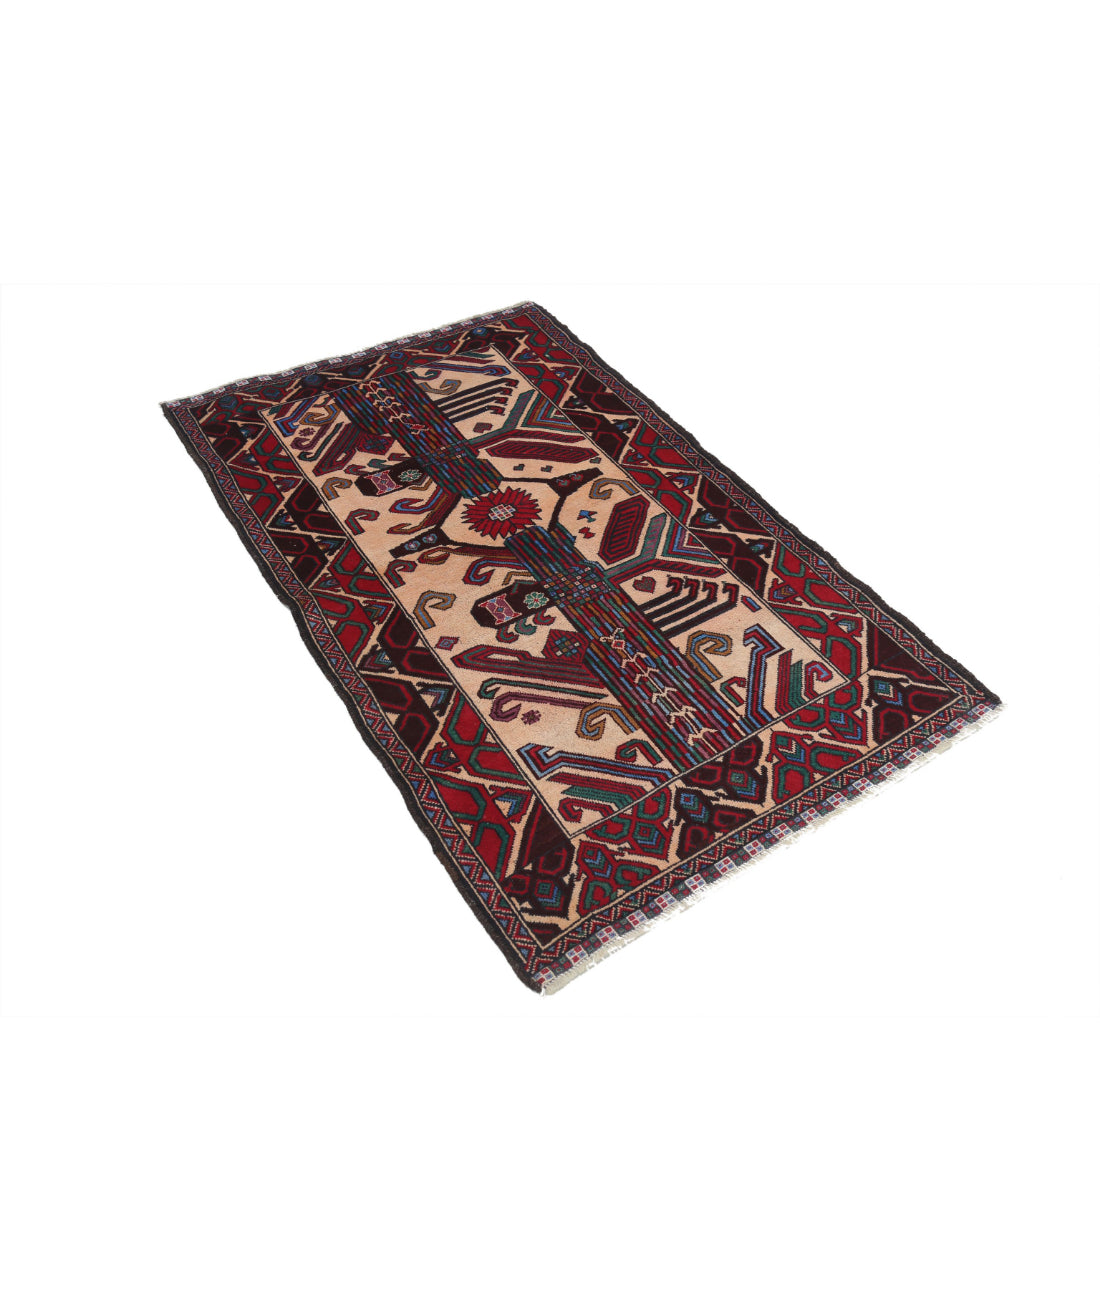 Baluch 3'0'' X 5'0'' Hand-Knotted Wool Rug 3'0'' x 5'0'' (90 X 150) / Red / N/A